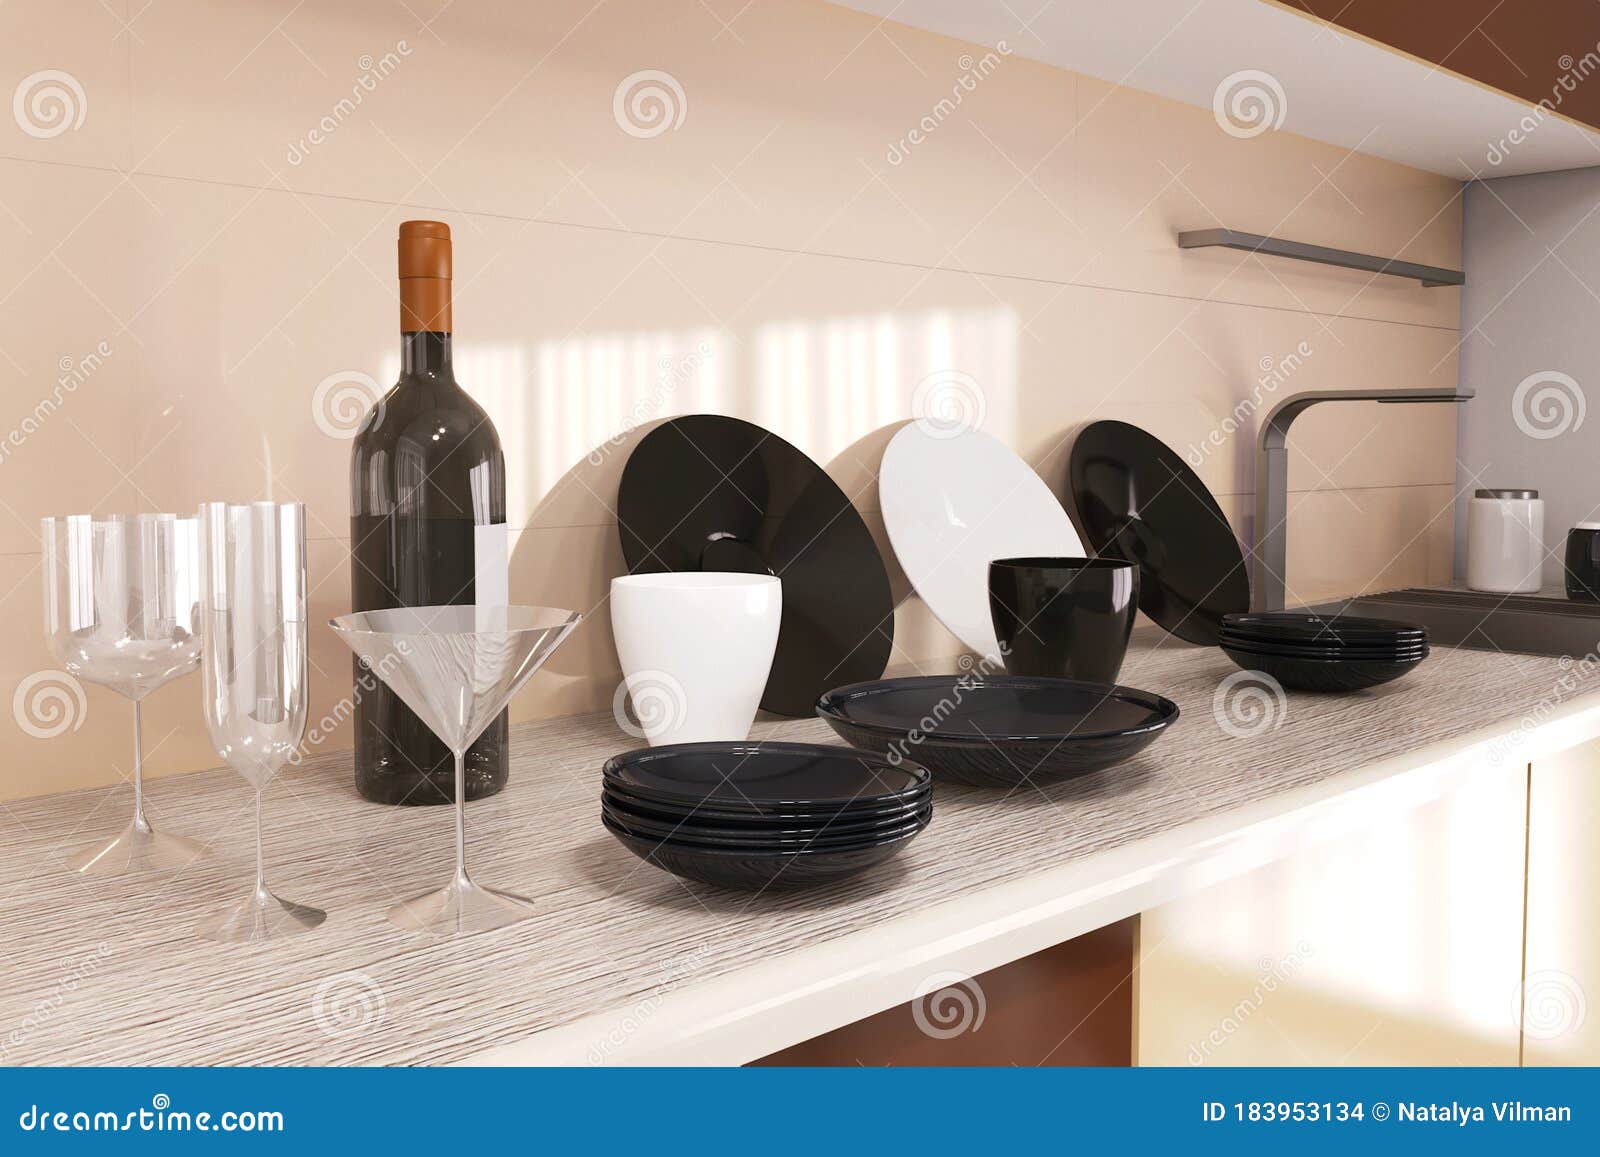 Home Modern Kitchen, Household. a Bottle of Wine, Wine Glasses and